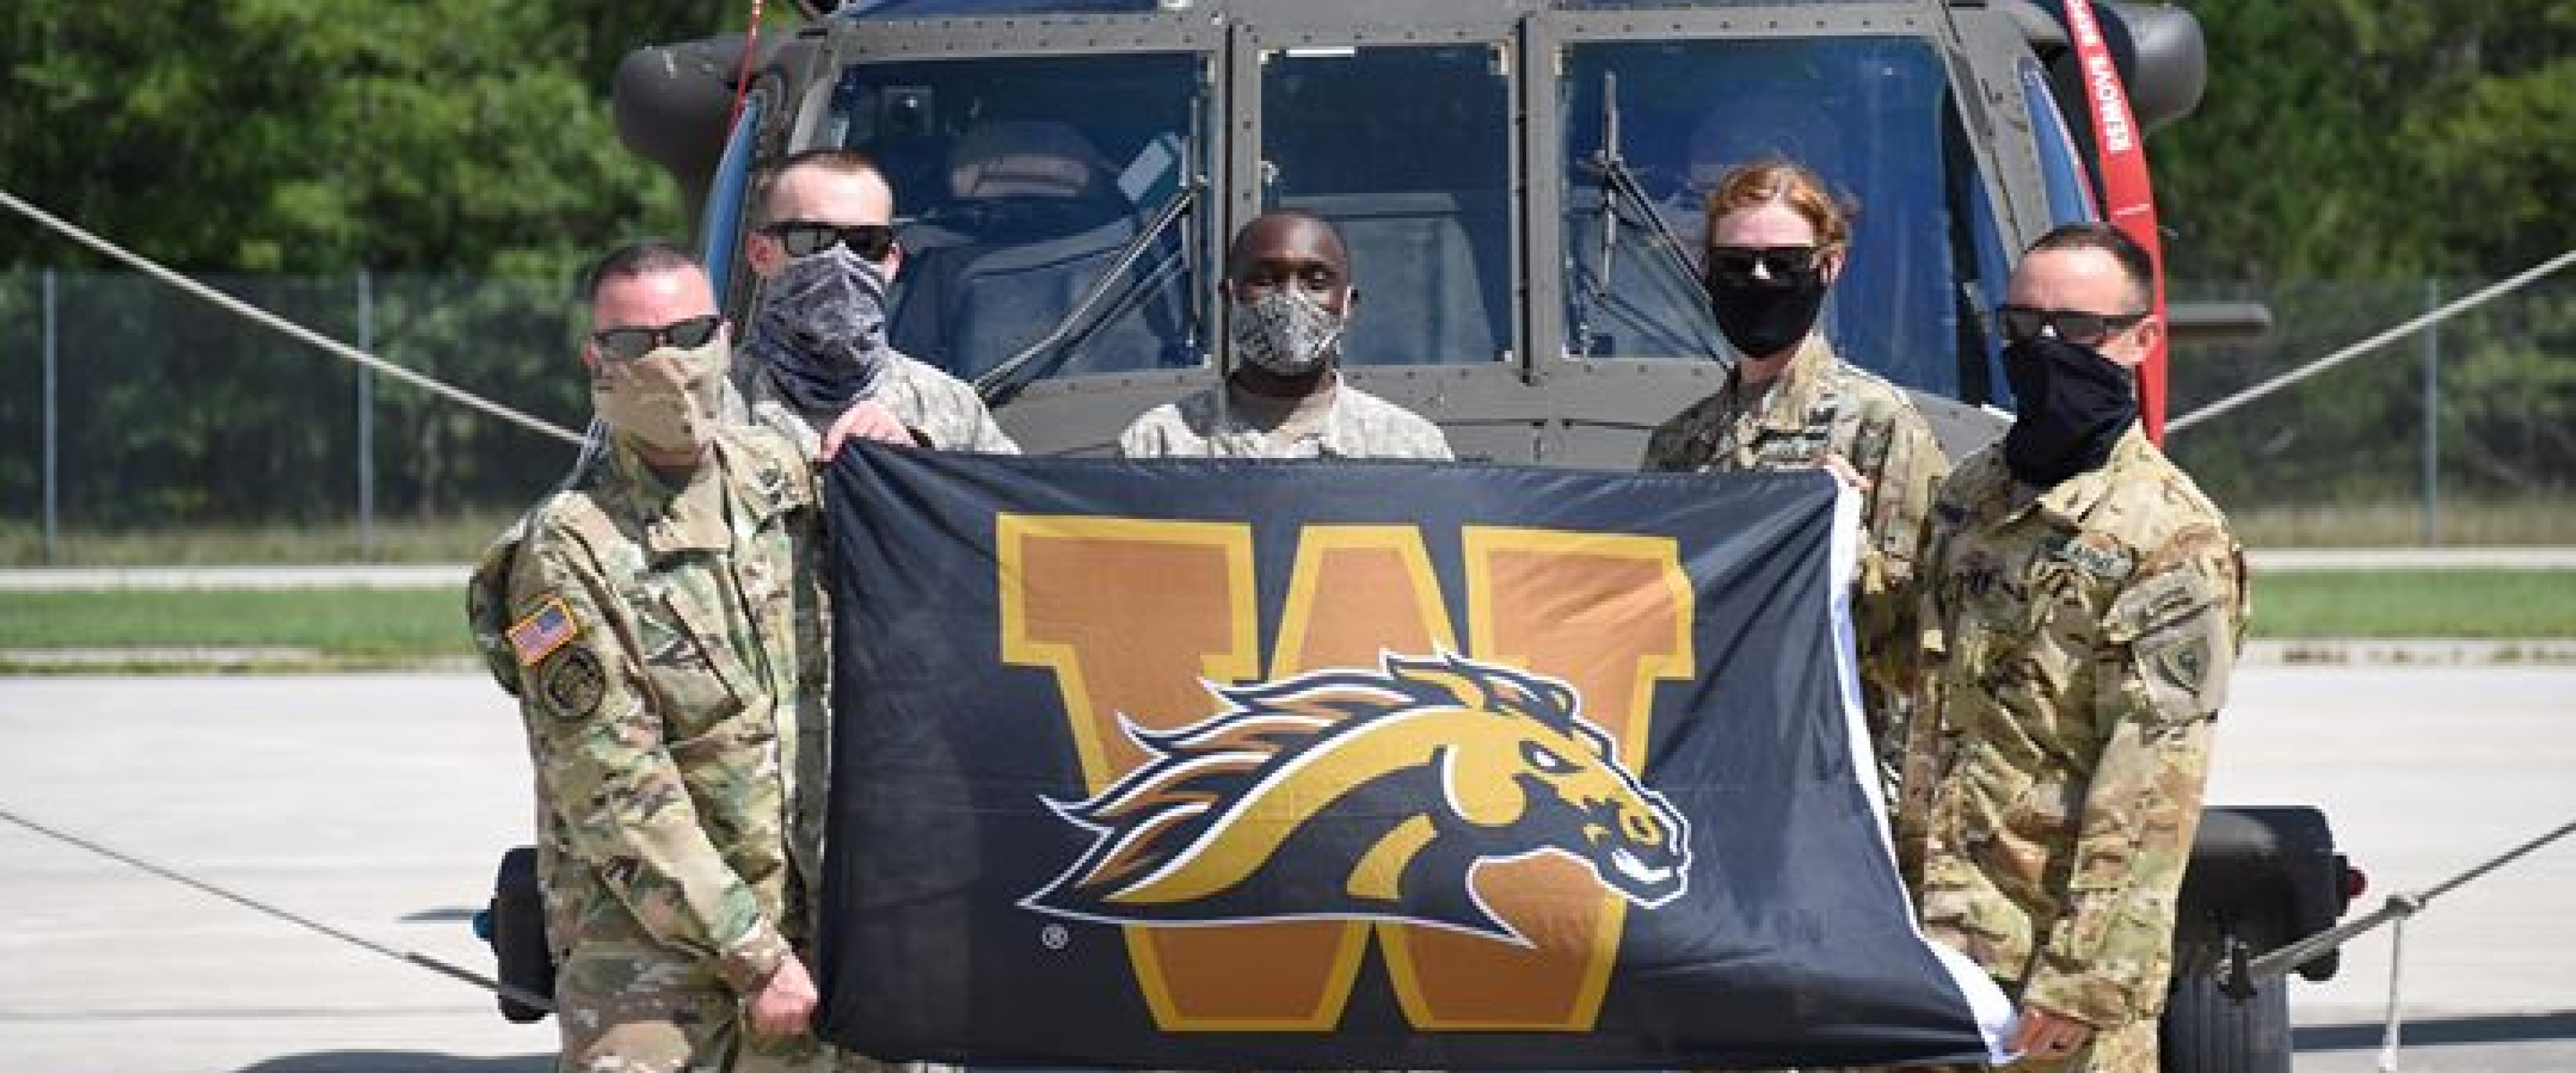 WMU military alumni holding a WMU flag in front of a helicopter